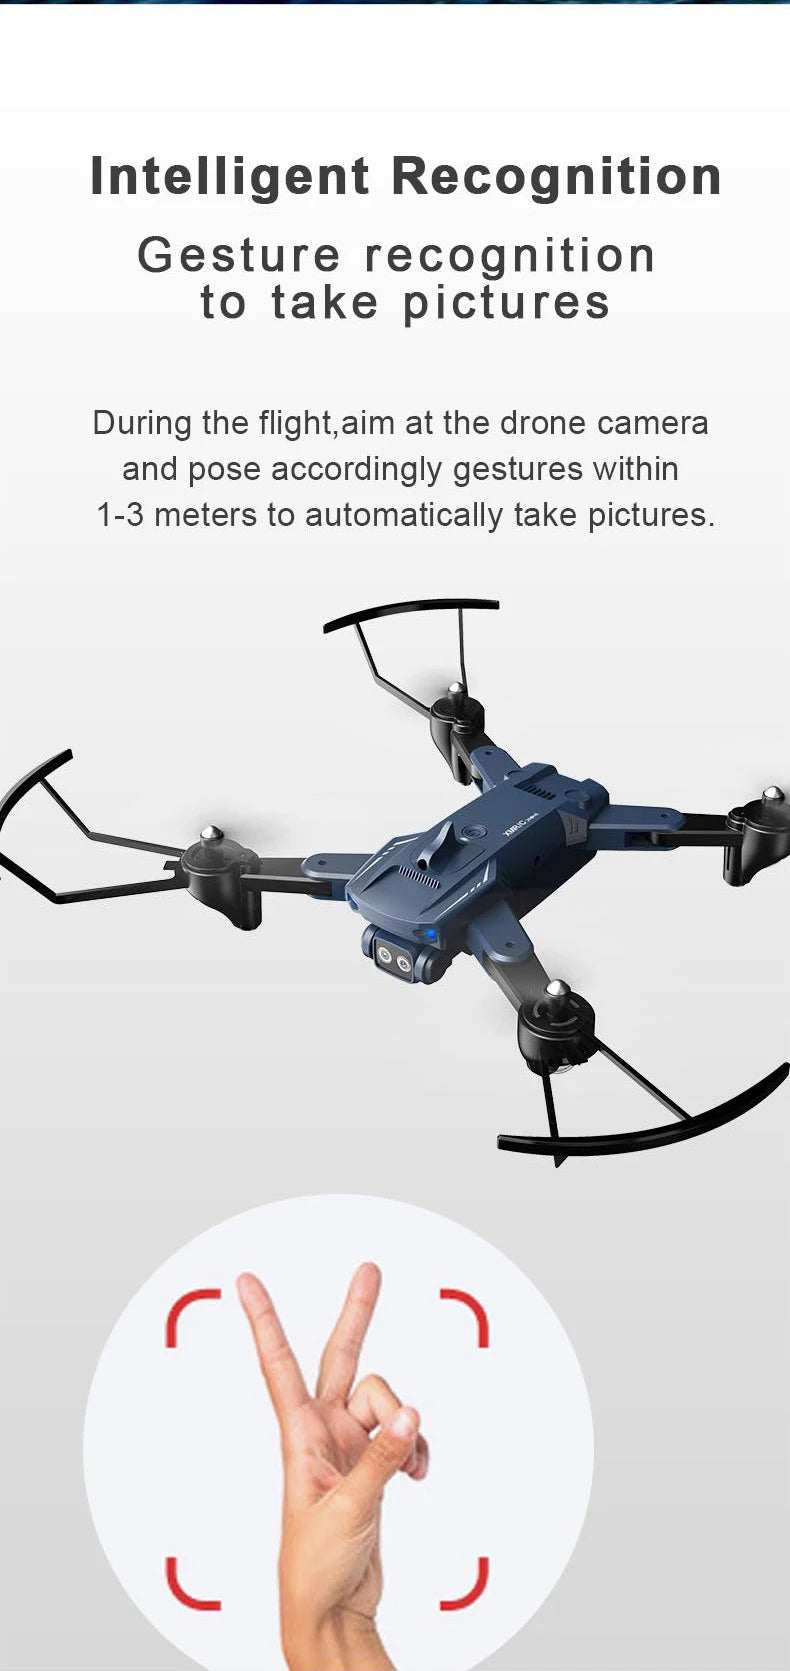 M6 Drone, intelligent recognition gesture recognition to take pictures during the flight . drone camera